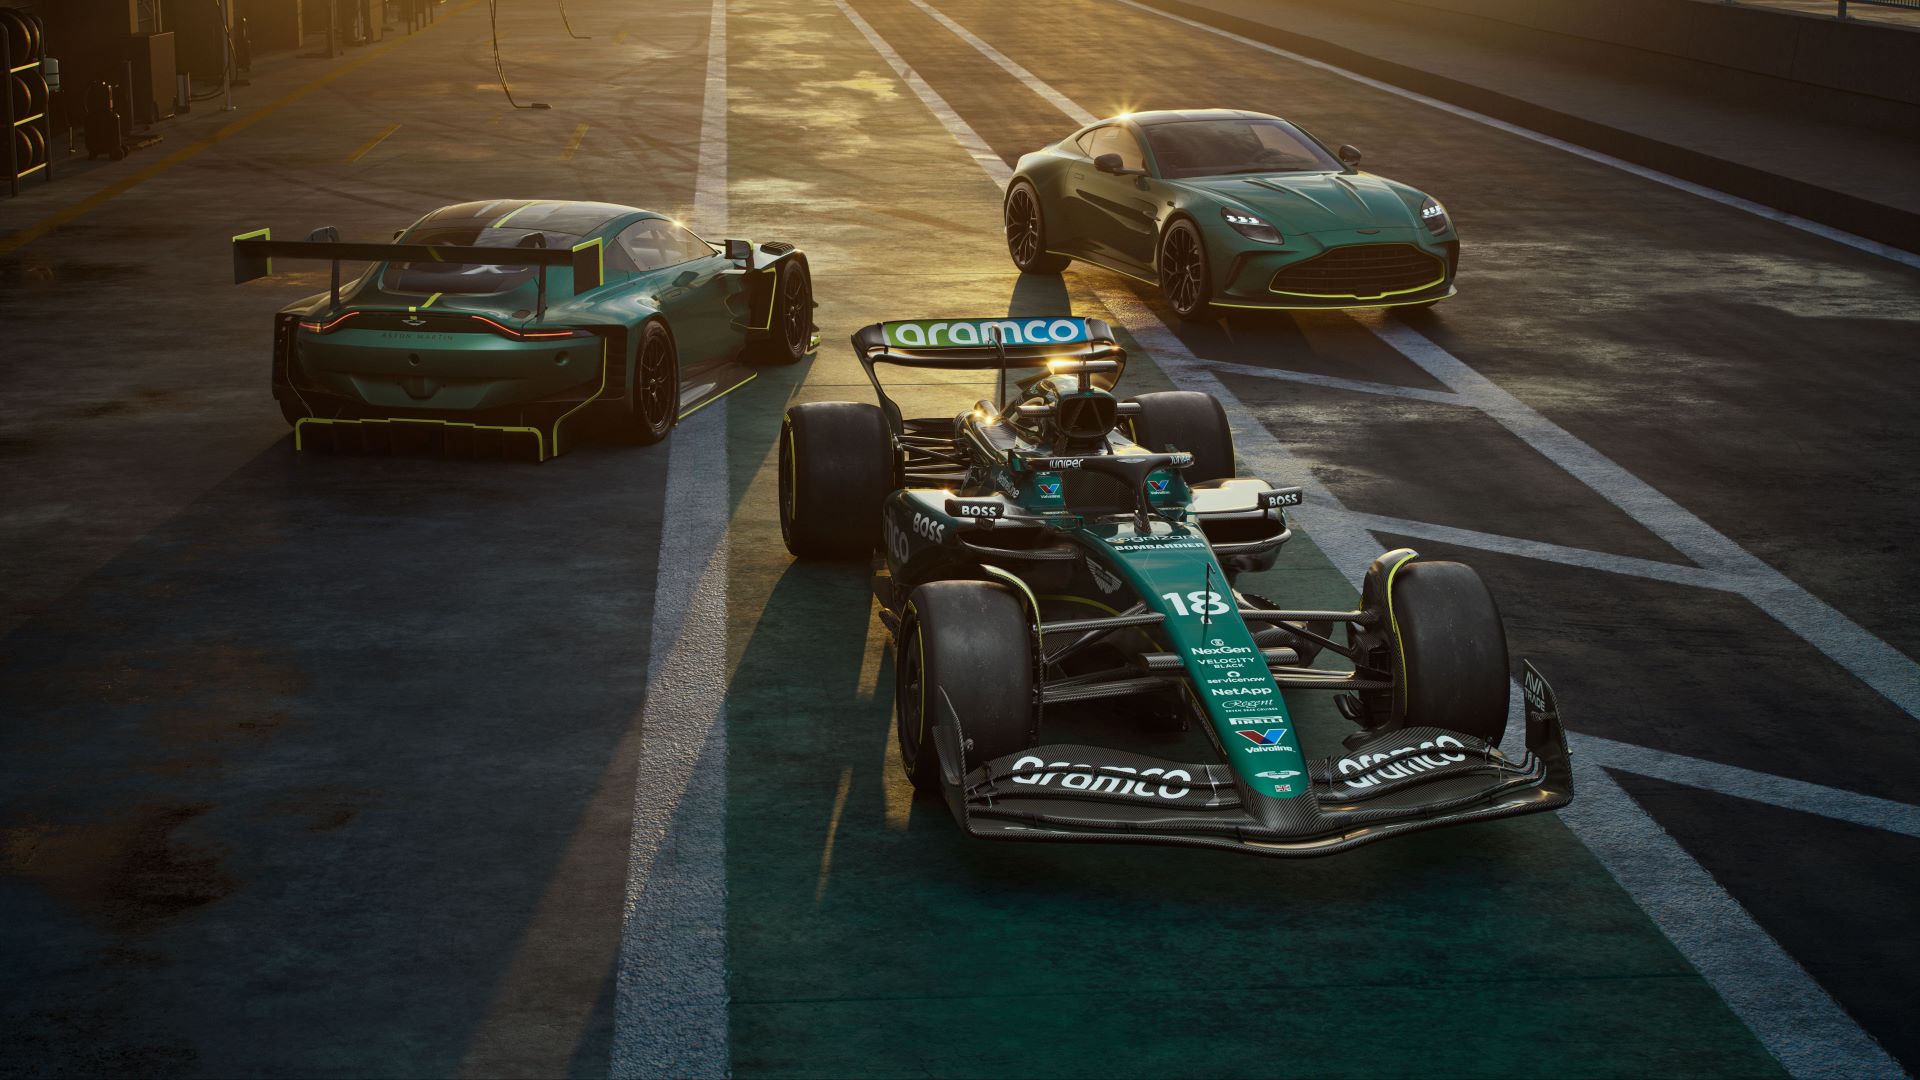 Aston Martin Racing Green takes pole position as brand’s most popular colour choice following F1® success